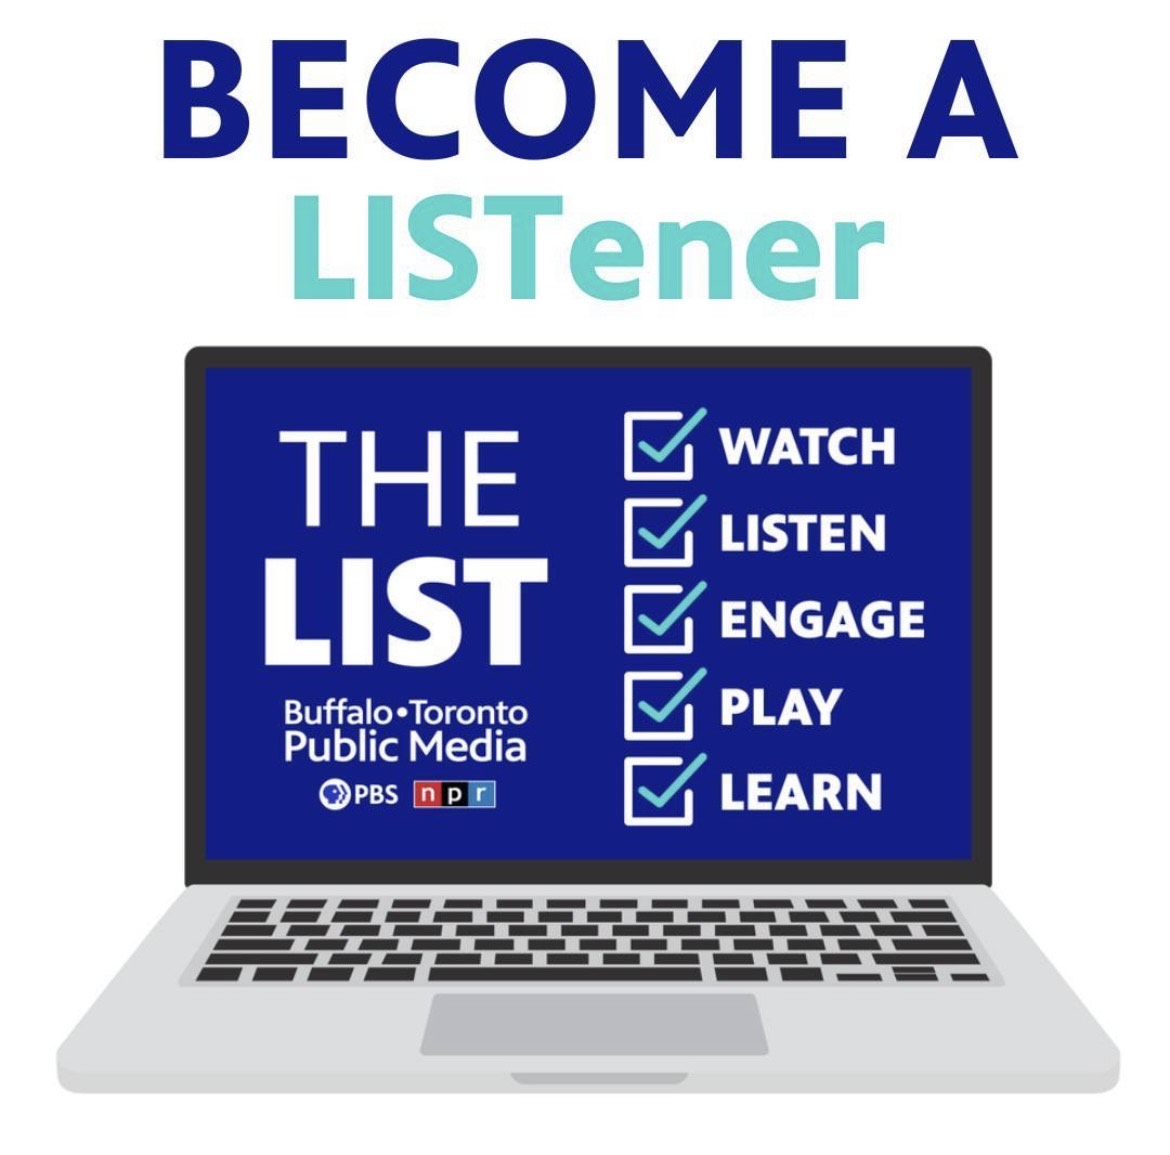 LISTeners, PUT YOUR HANDS UP!✋🏽 Stay in-the-loop with the latest happenings at your local public media stations when you get on #TheList. Once subscribed, you'll find this newsletter in your inbox every Thursday morning so you know what’s coming up before the weekend hits!💻